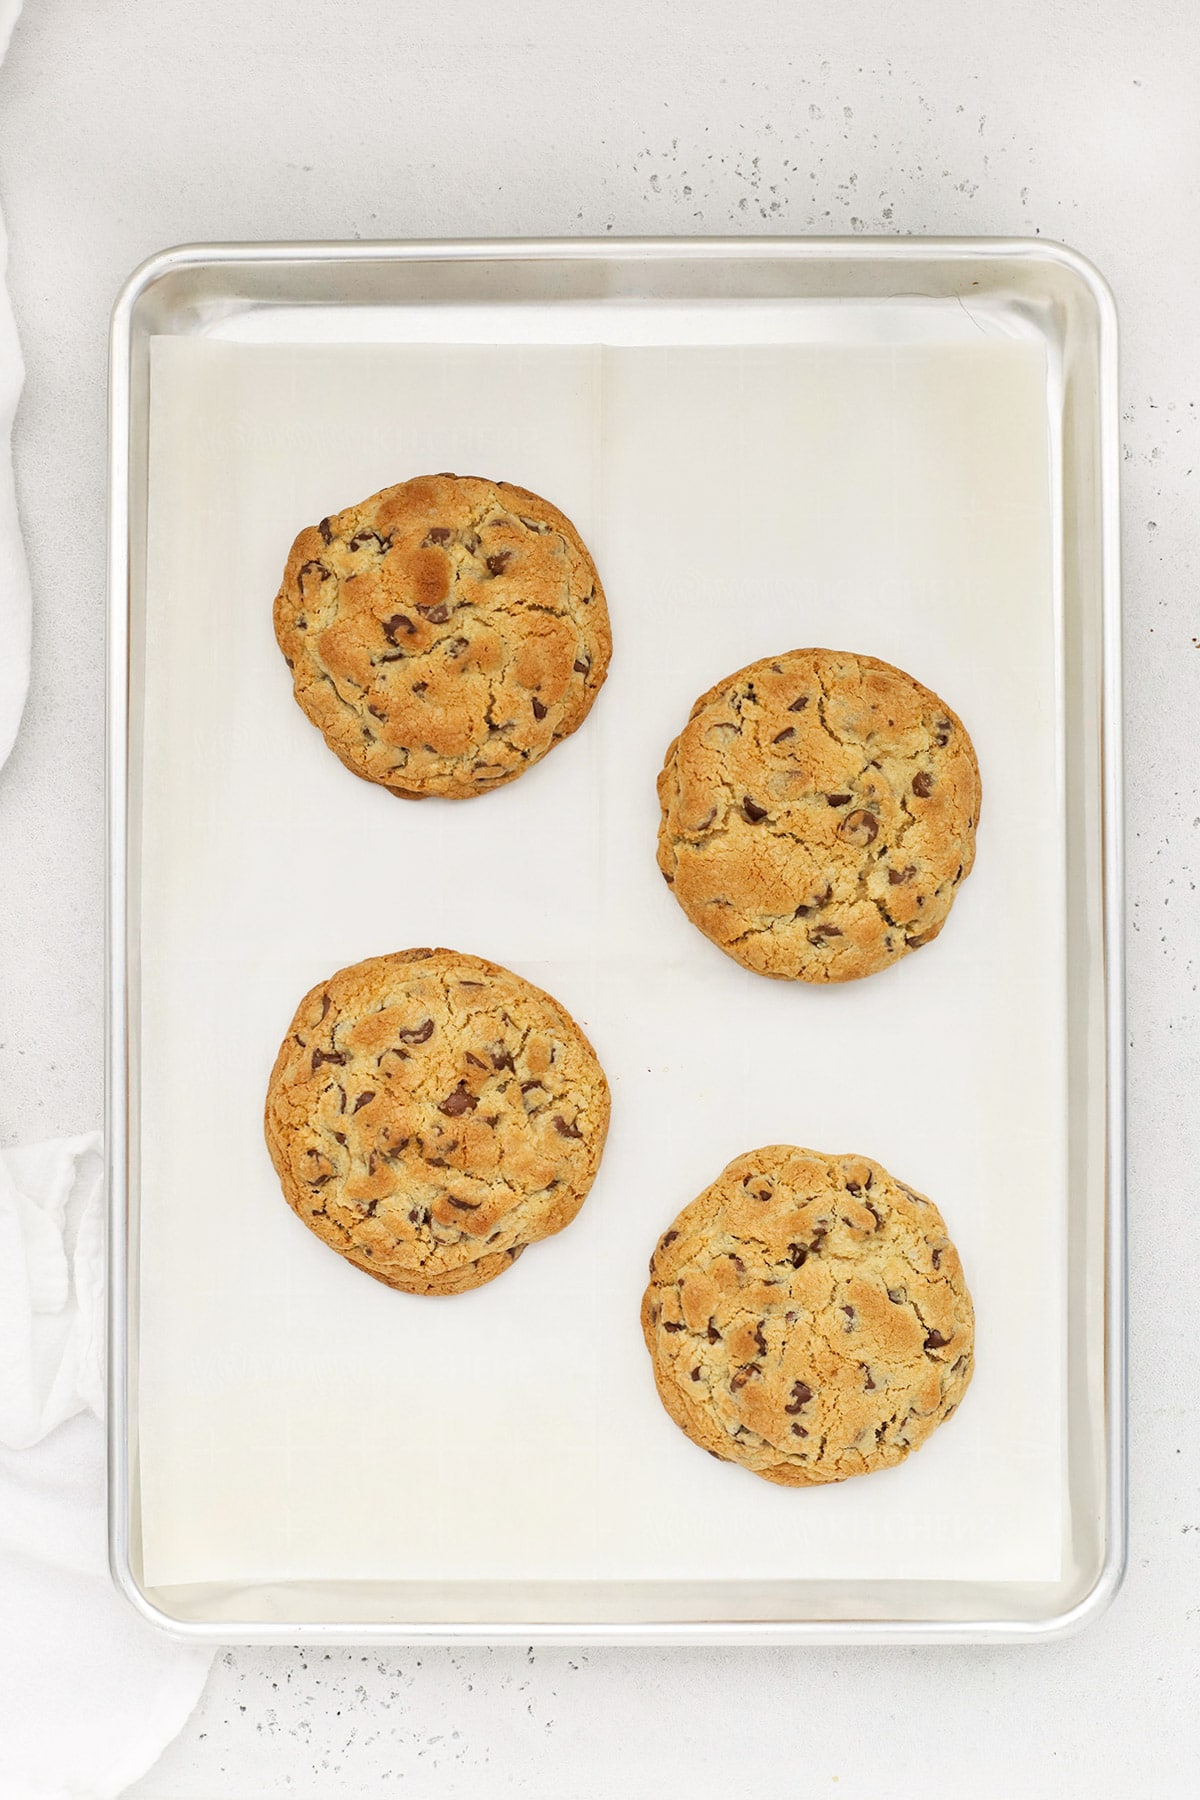 Four thick gluten-free chocolate chip cookies hot from the oven